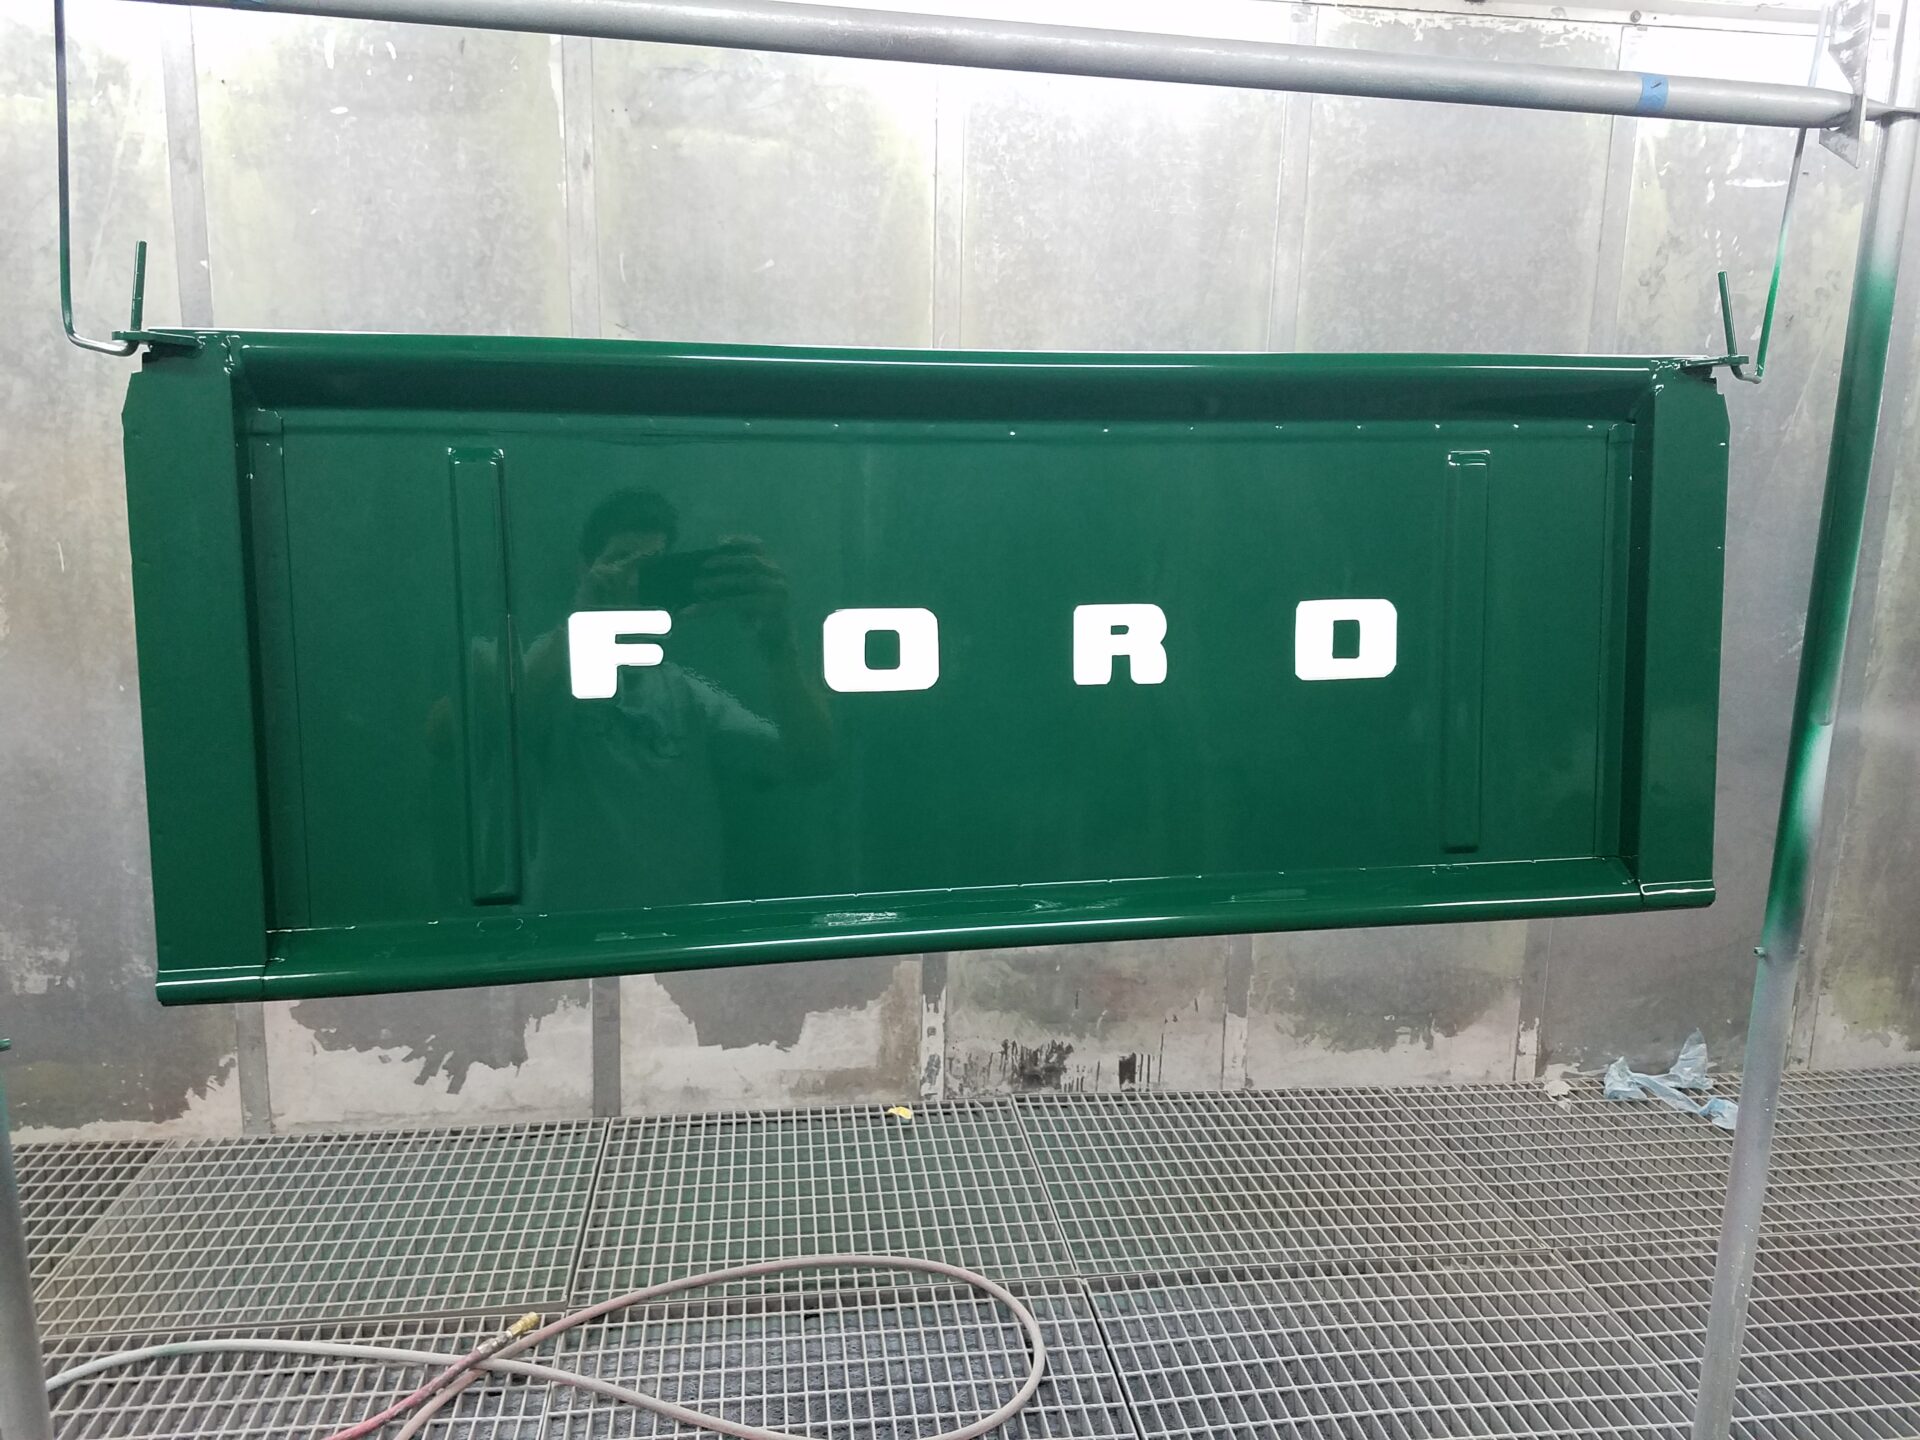 Ford logo on a car part